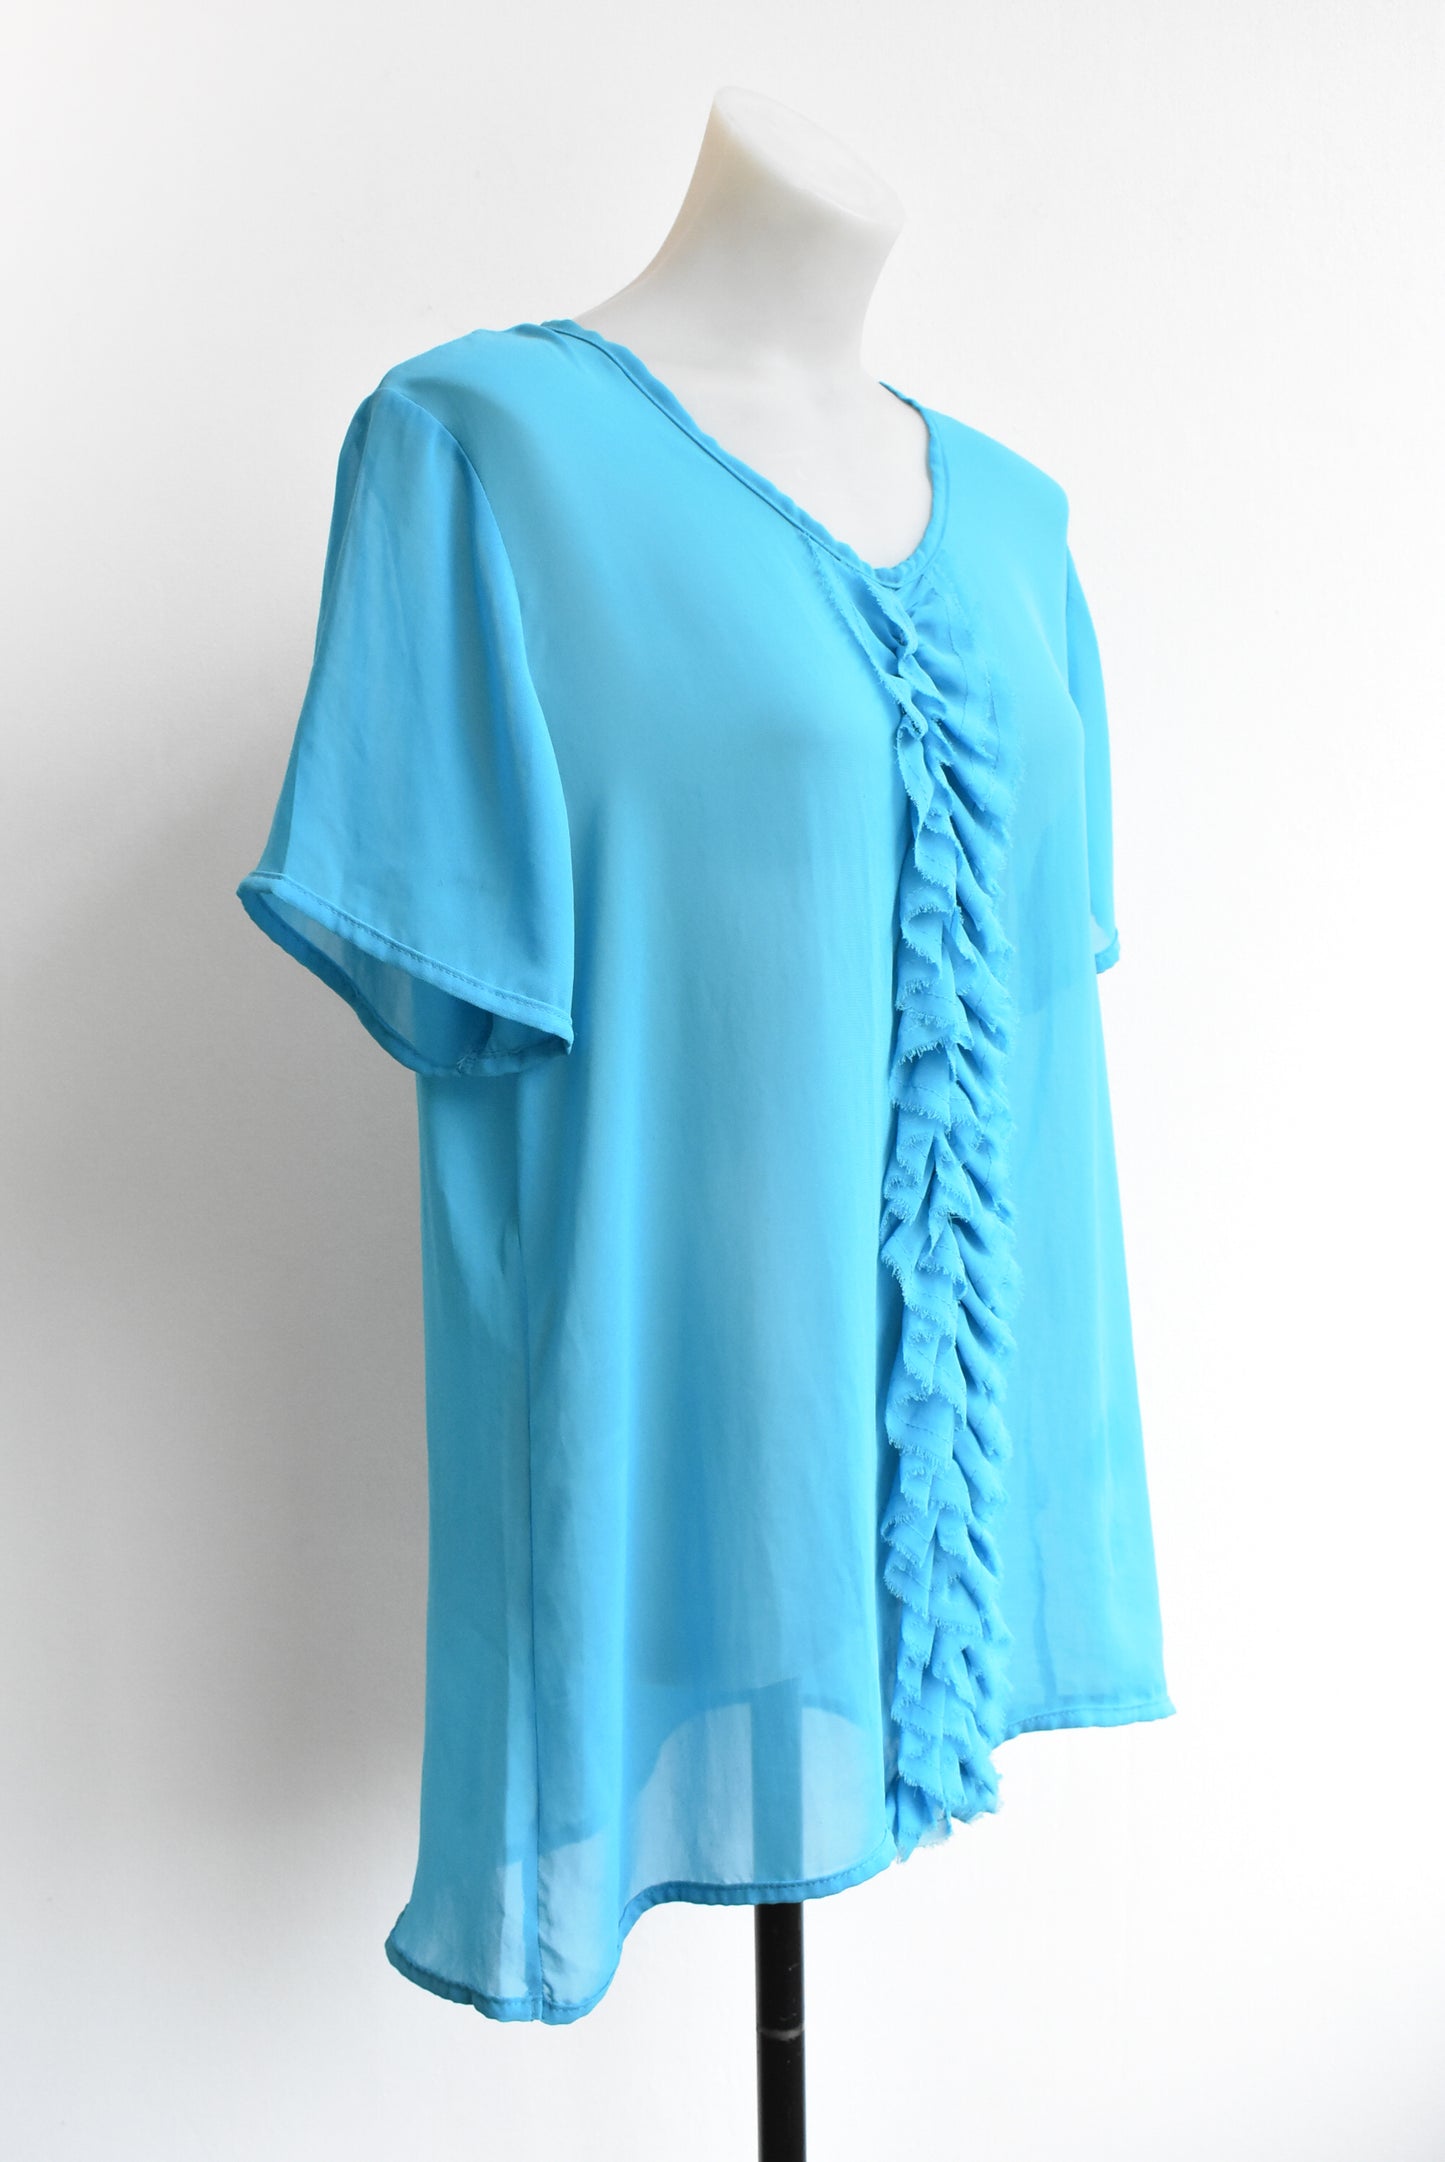 Art Style sheer blue top, size 16